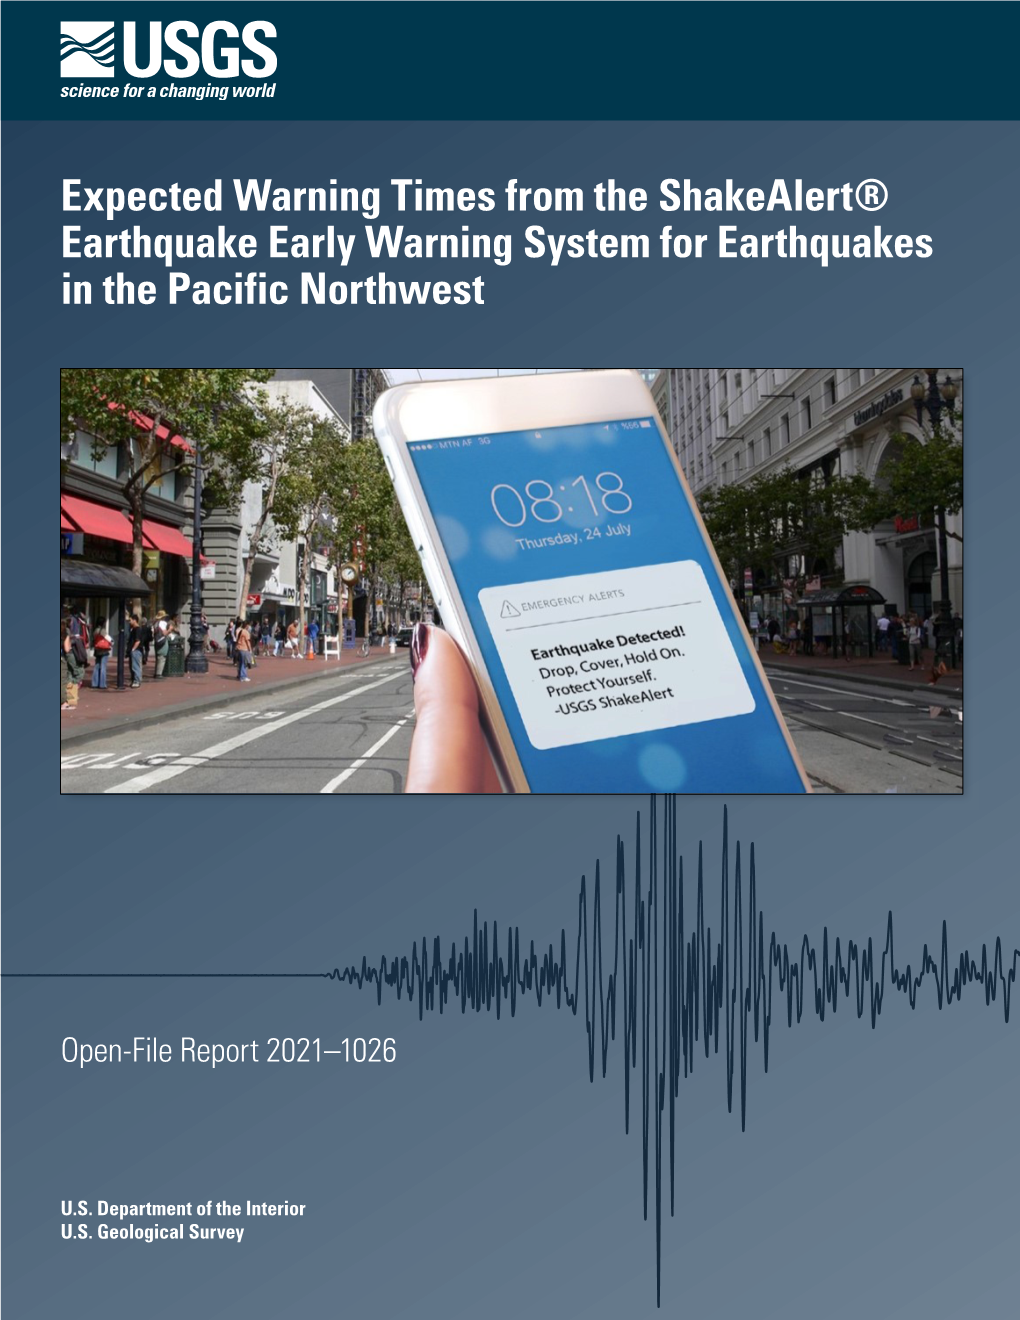 Expected Warning Times from the Shakealert® Earthquake Early Warning System for Earthquakes in the Pacific Northwest